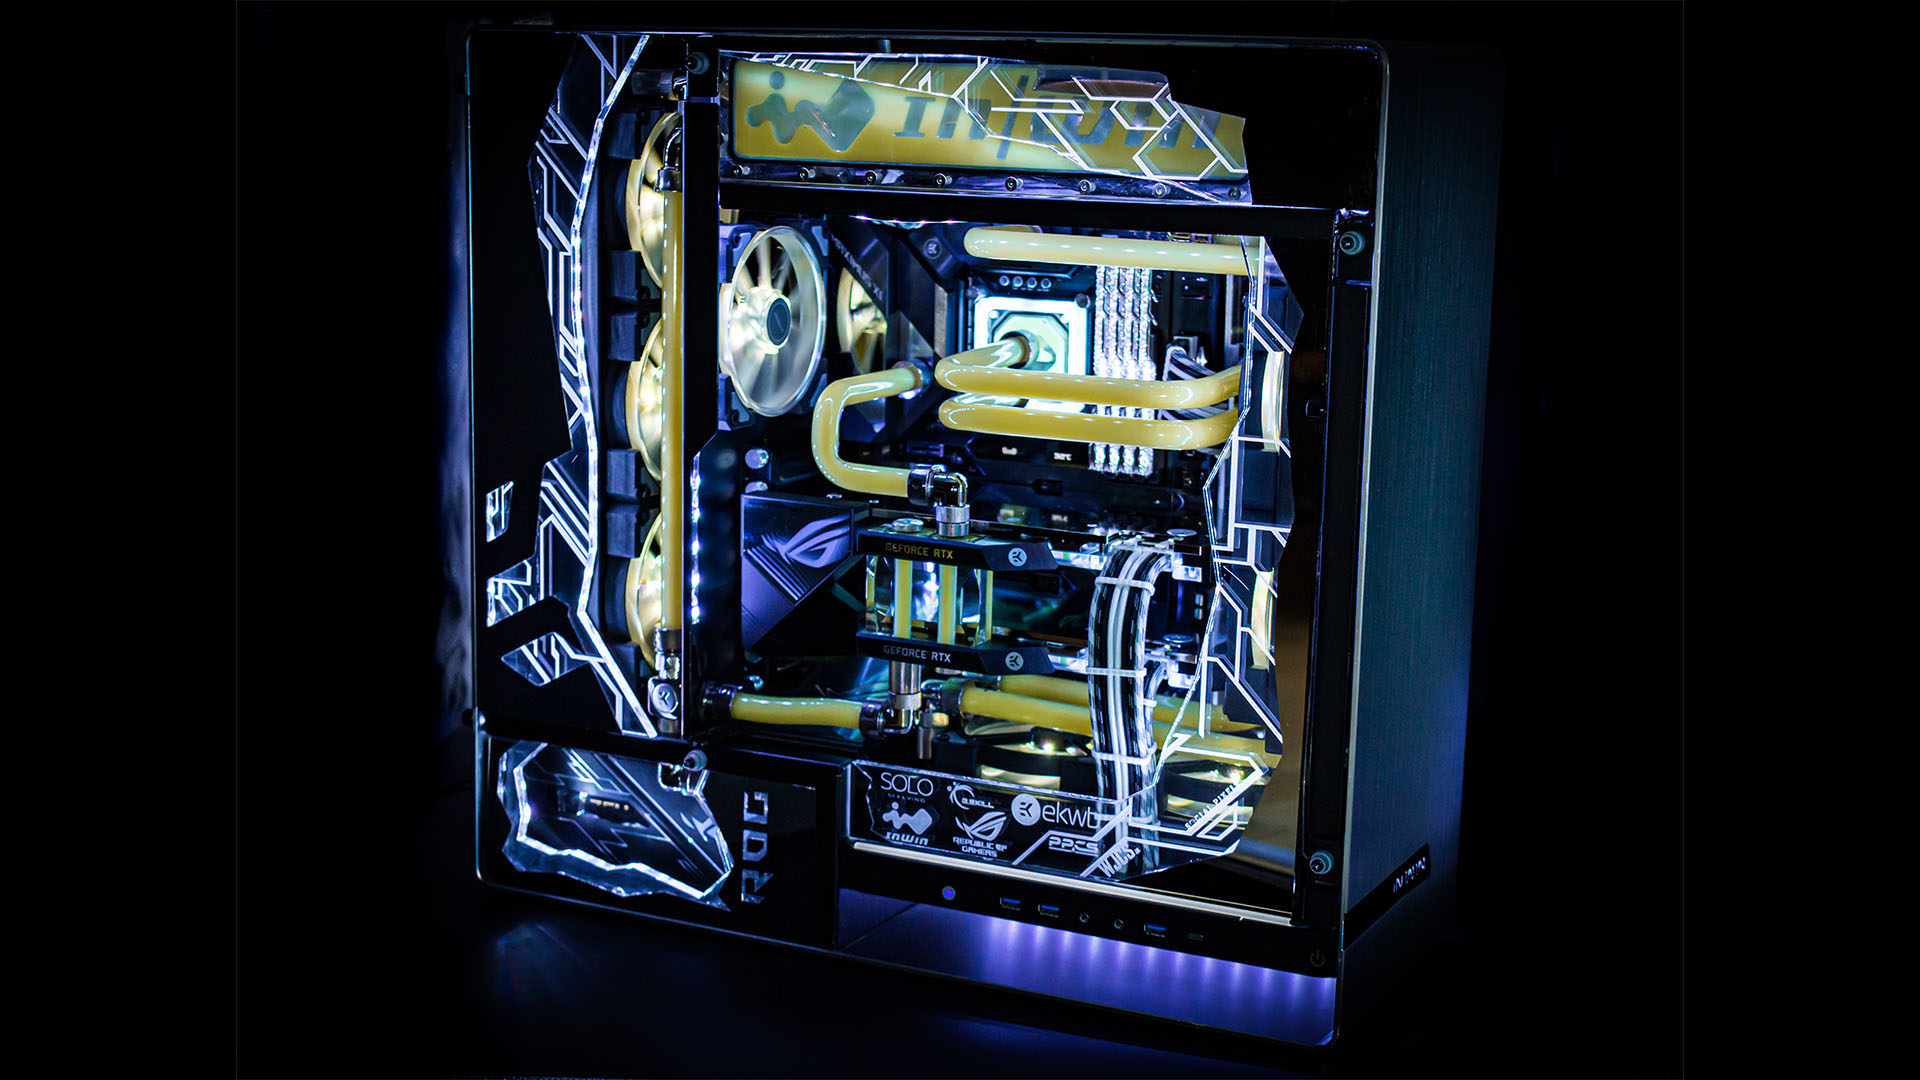 This water cooled gaming PC has stunning crystal effects